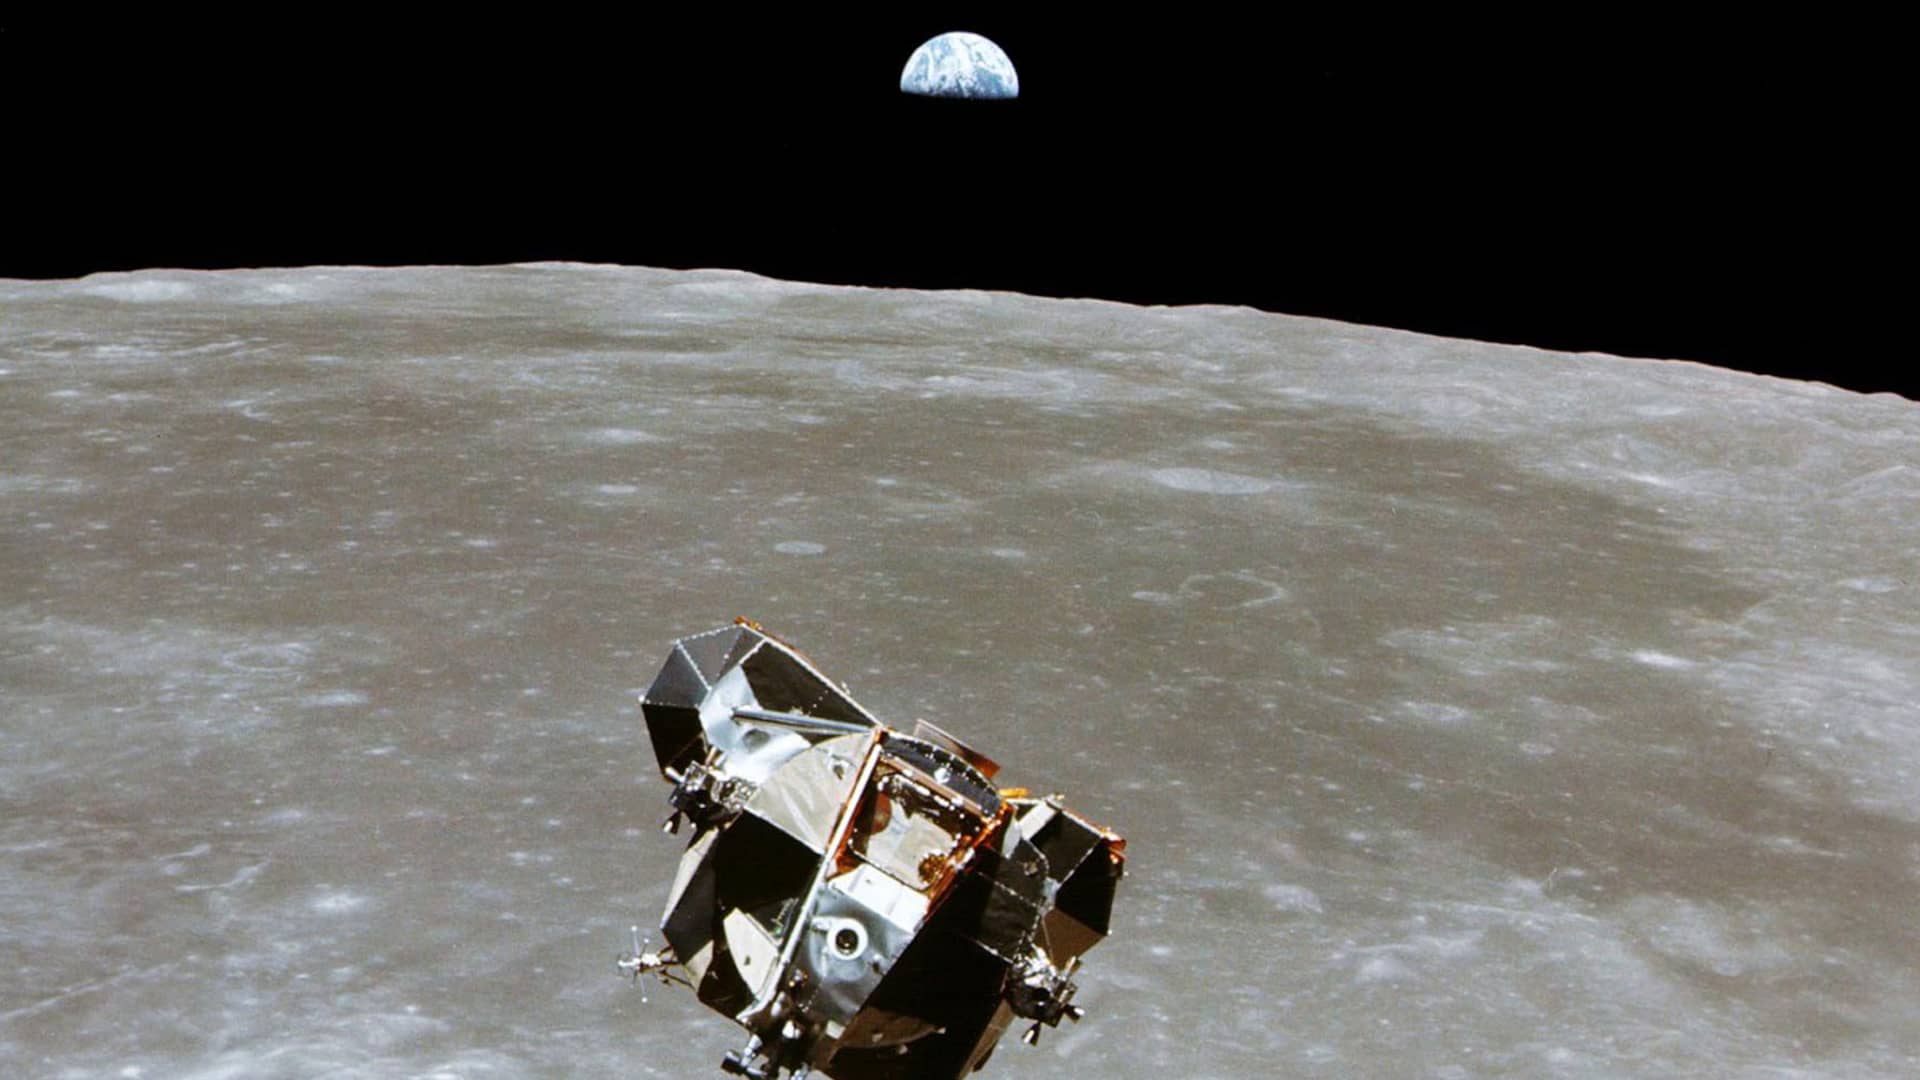 The Apollo 11 Lunar Module ascent stage, with astronauts Neil A. Armstrong and Edwin E. Aldrin Jr. aboard, is photographed from the Command and Service Modules in lunar orbit in this July, 1969 file handout photo.